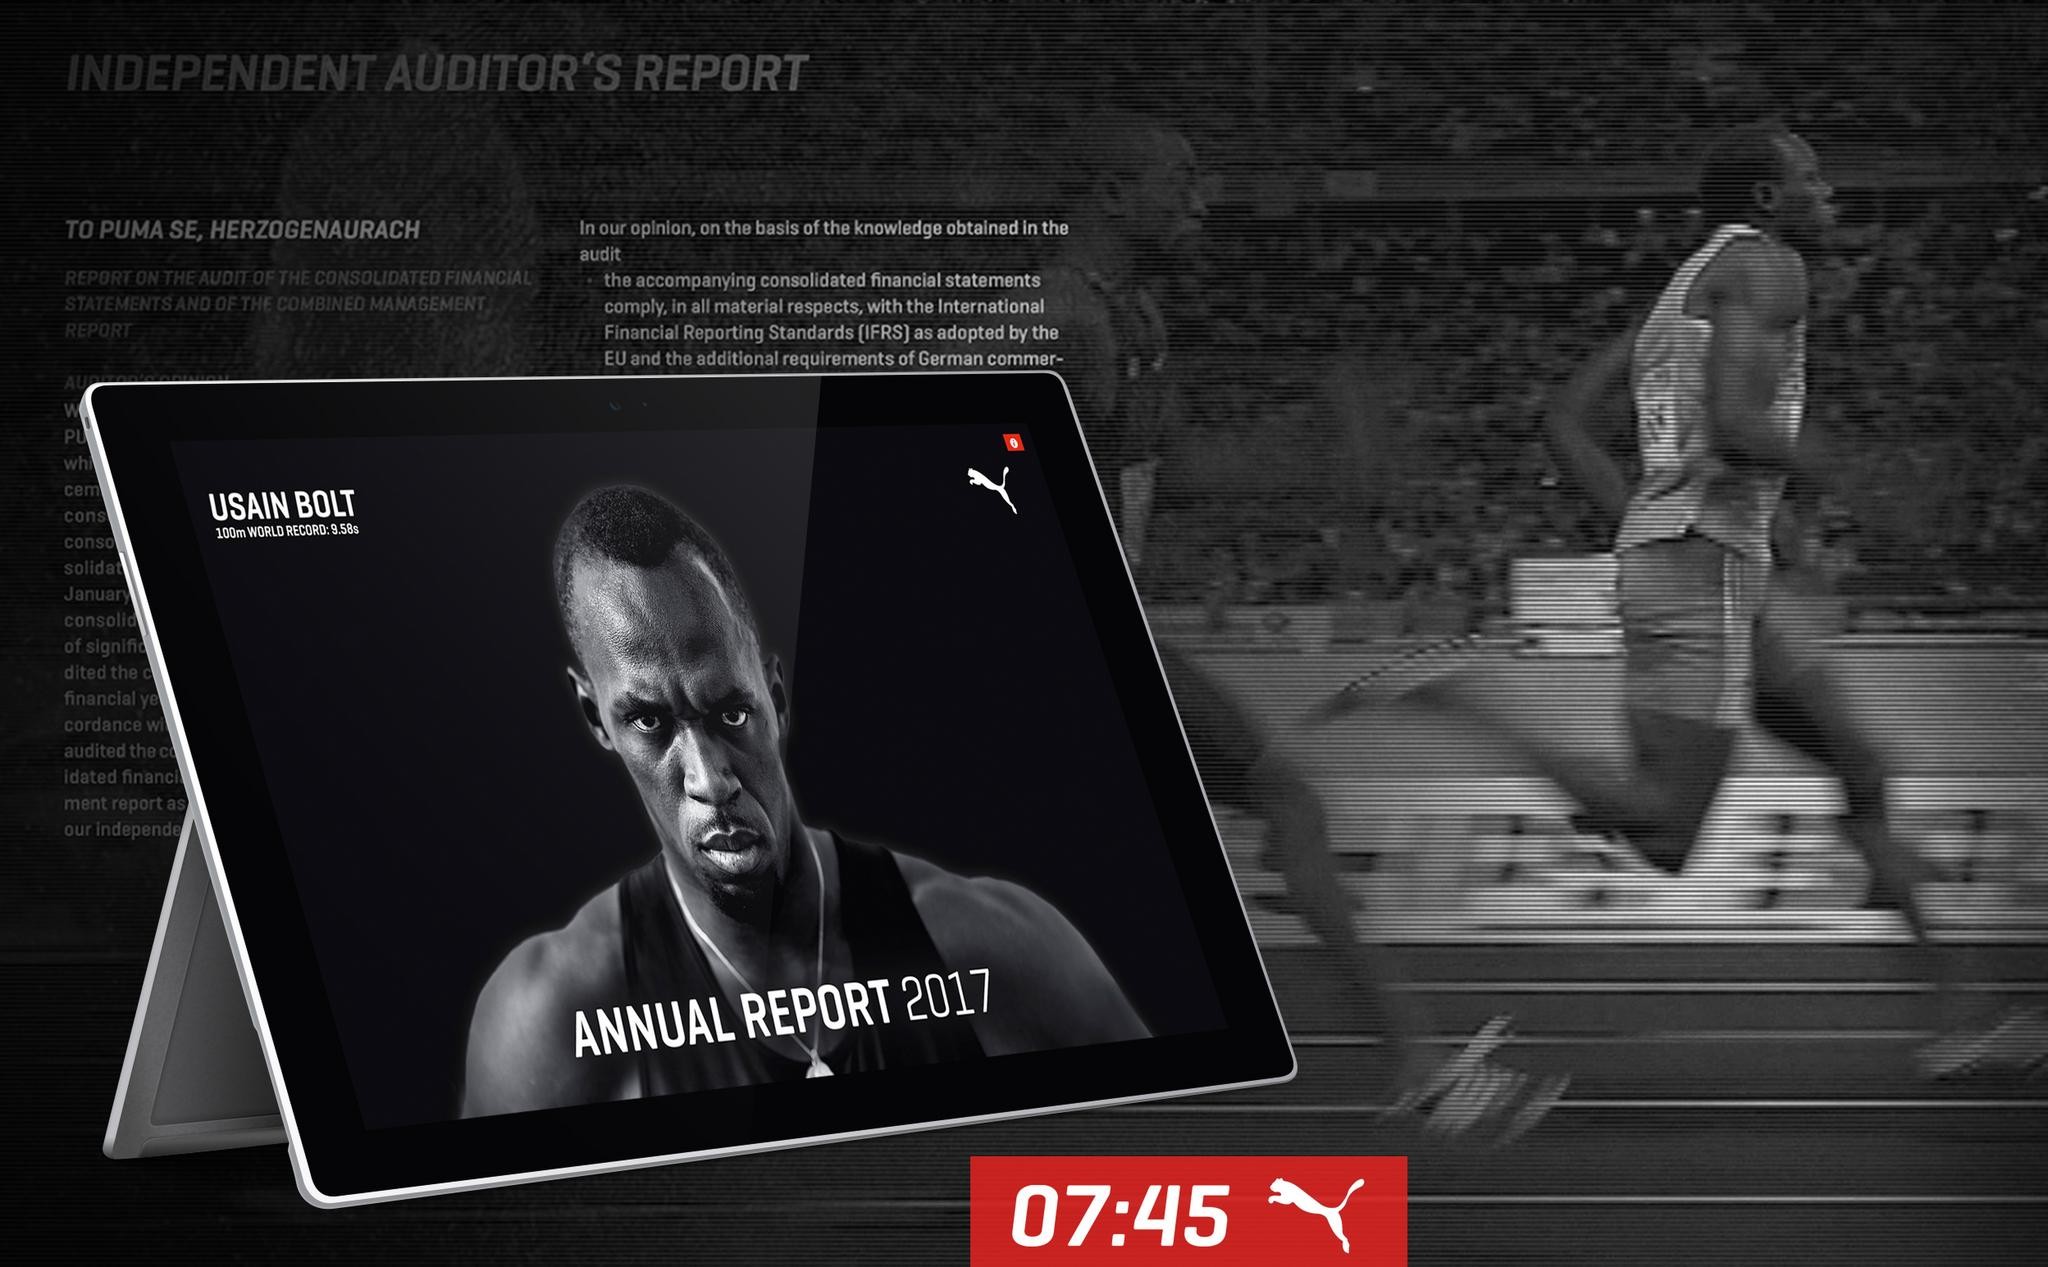 9.58 Seconds - The world's fastest annual report